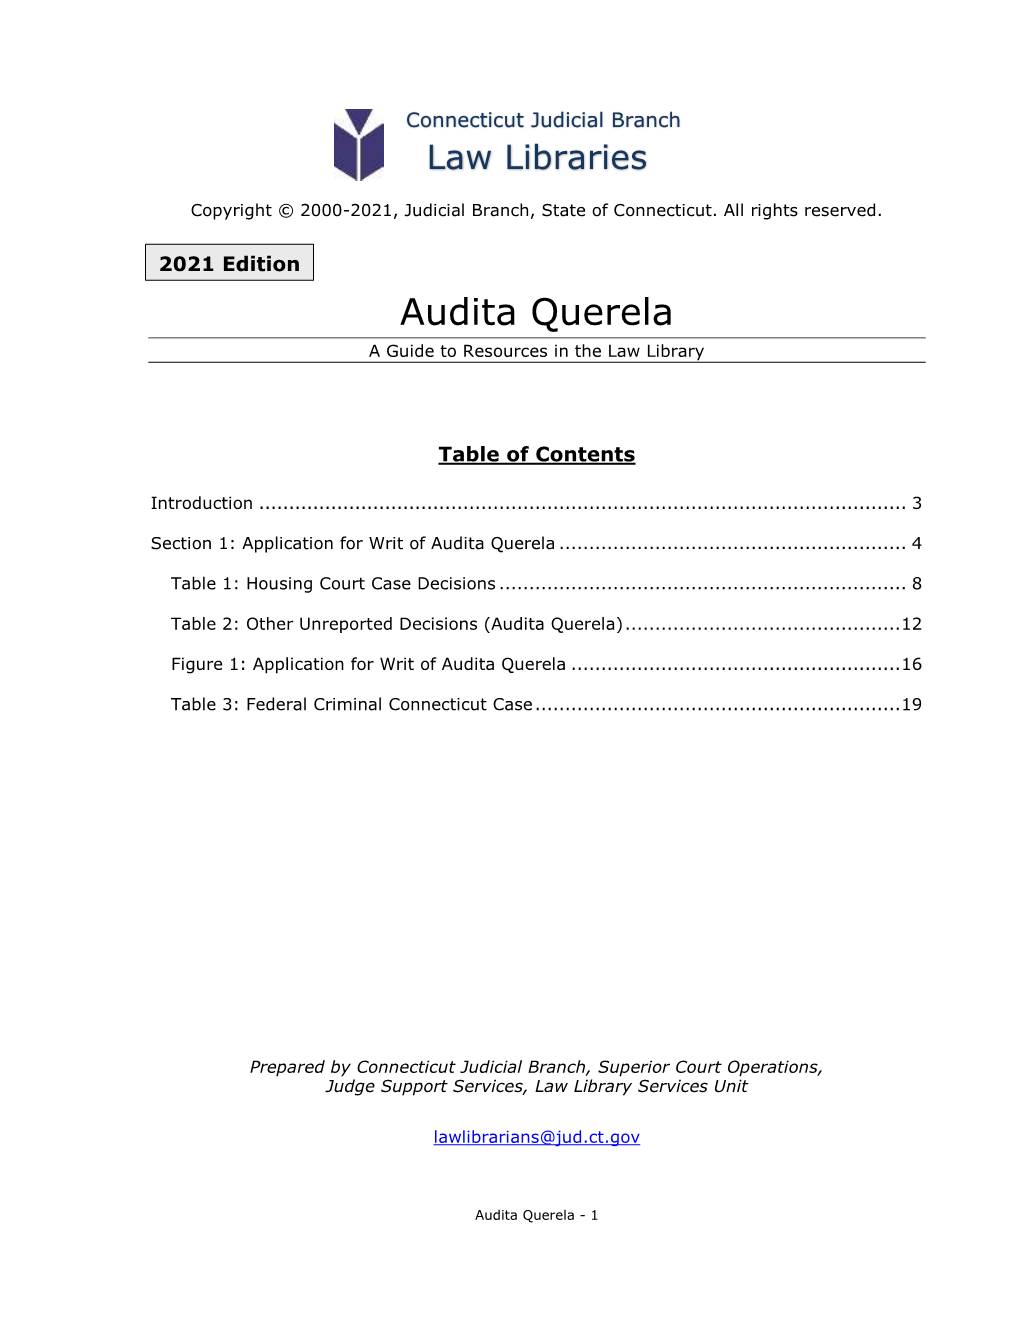 Audita Querela a Guide to Resources in the Law Library